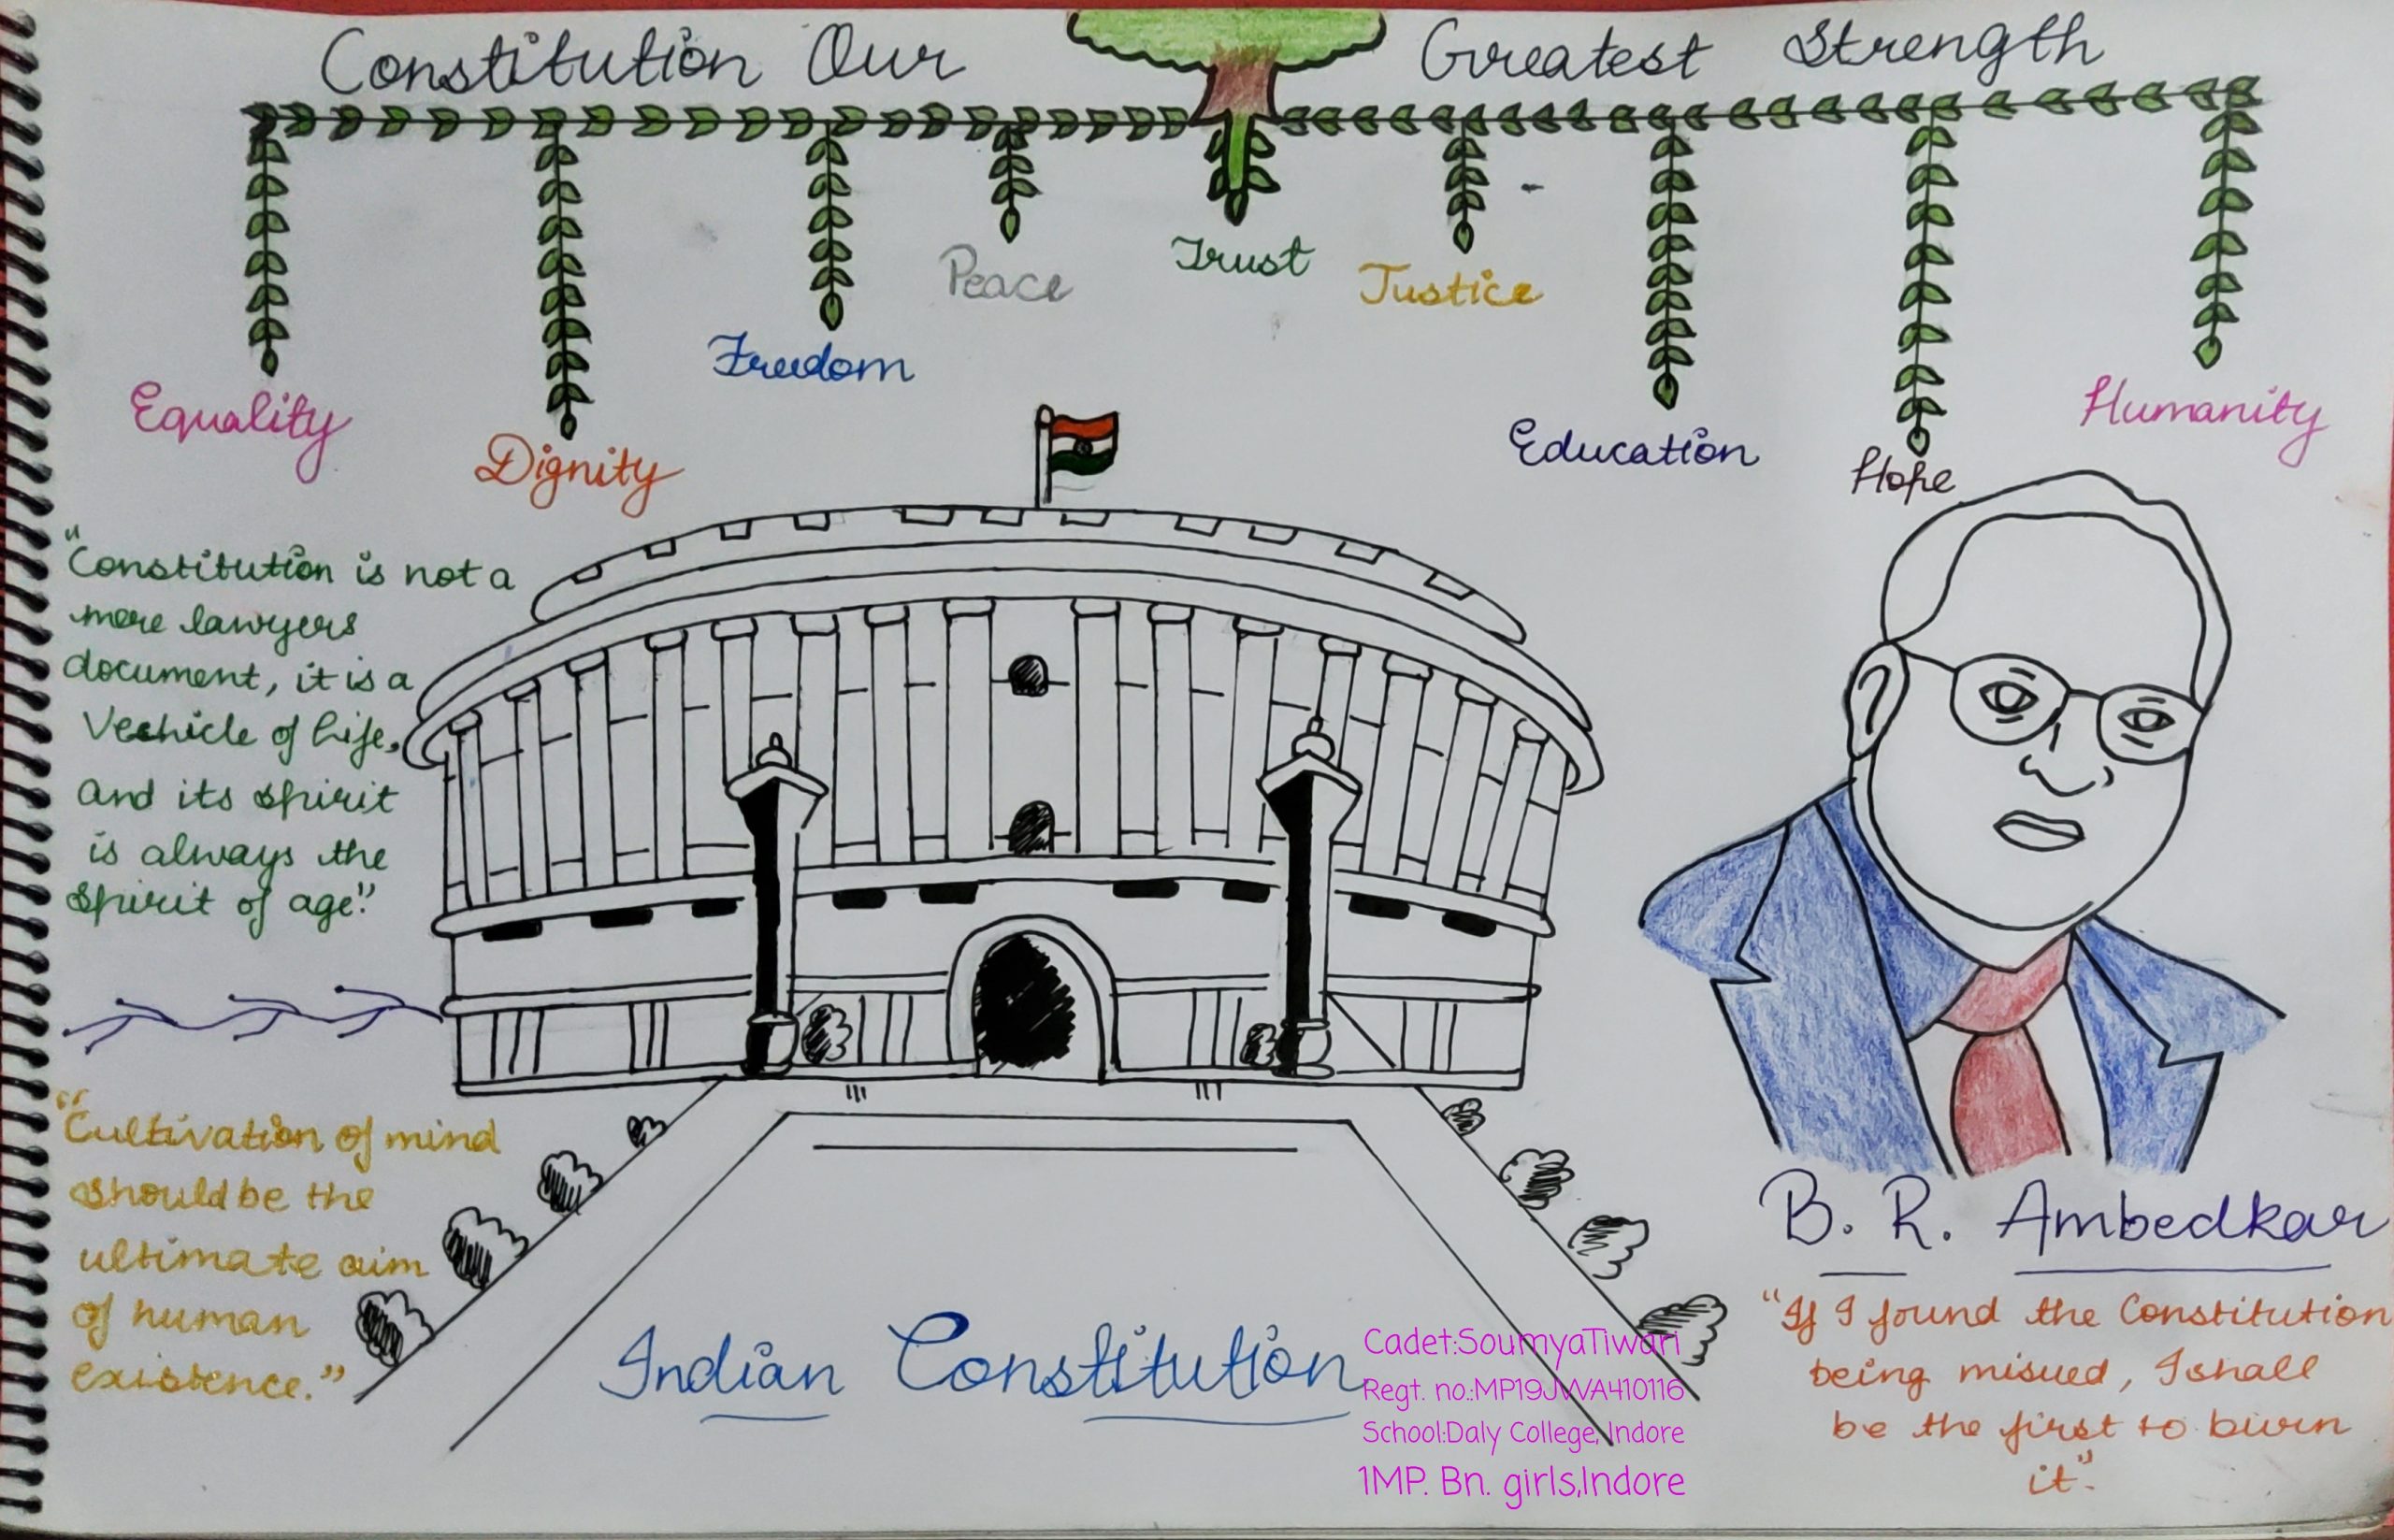 Poster making competition – constitution of India – India NCC